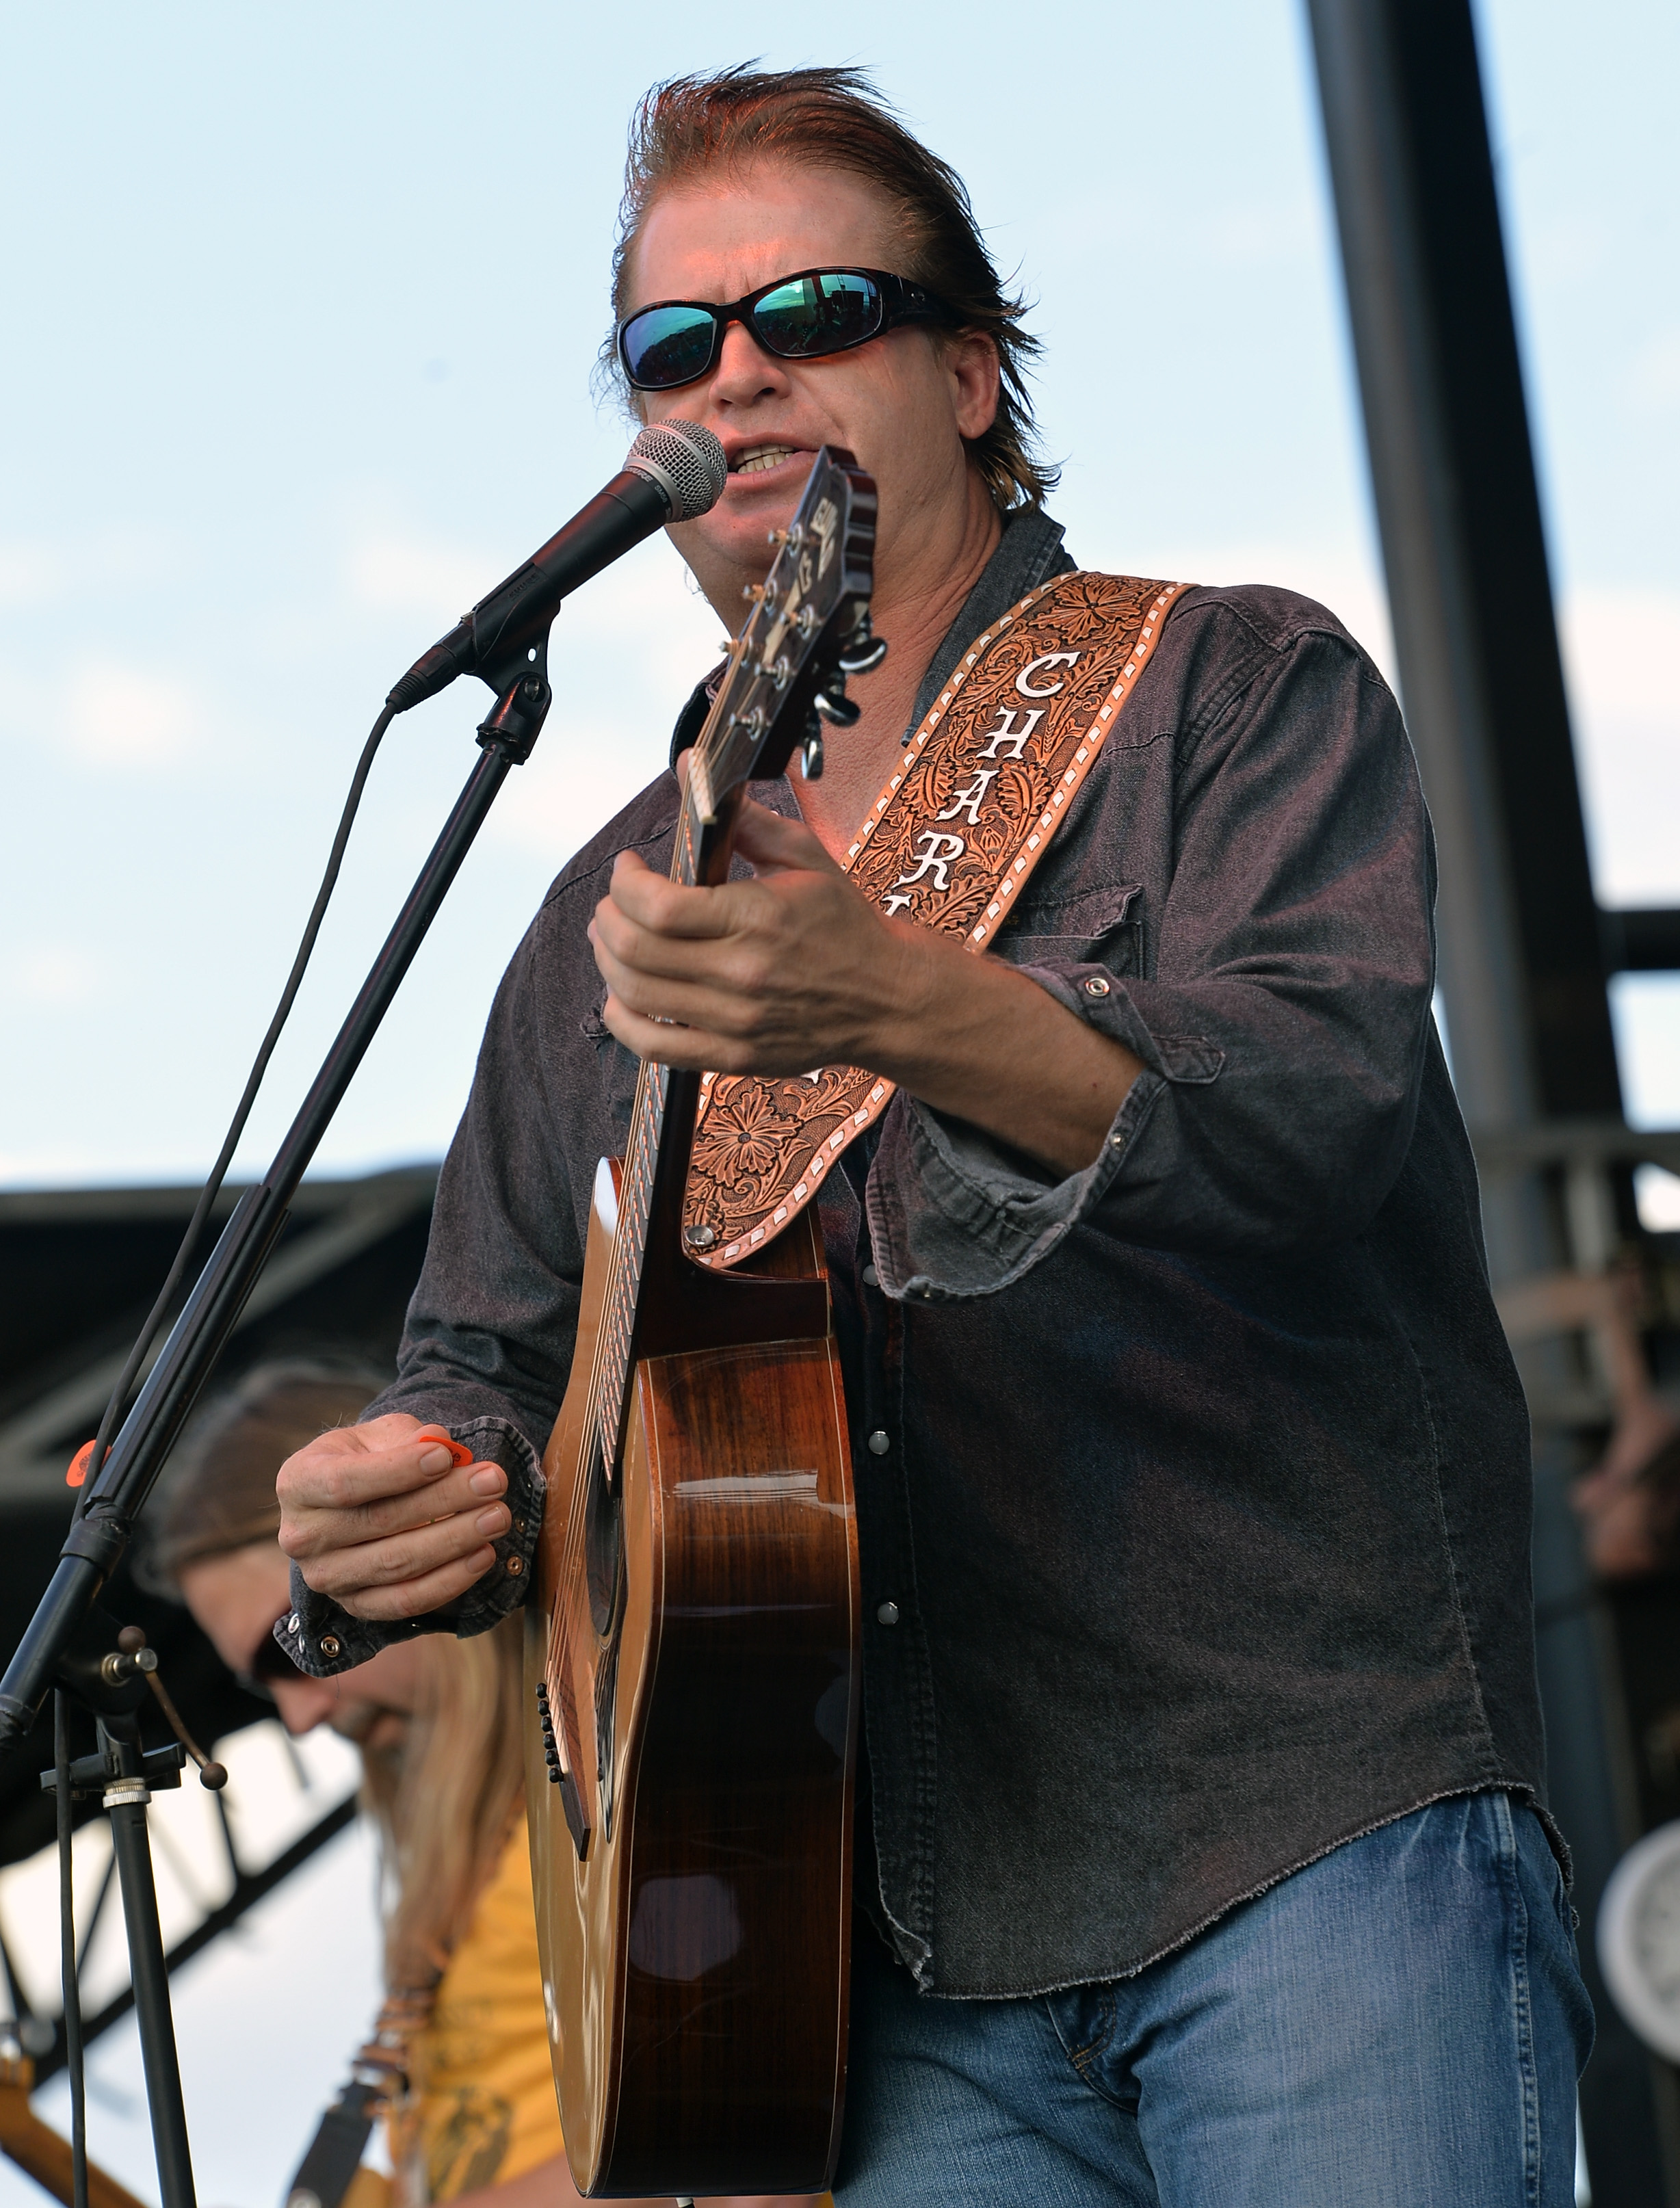 Charlie Robison performing at Texas Thunder Festival 2013 - Day 1 on May 17, 2013, in Gardendale, Texas. | Source: Getty Images